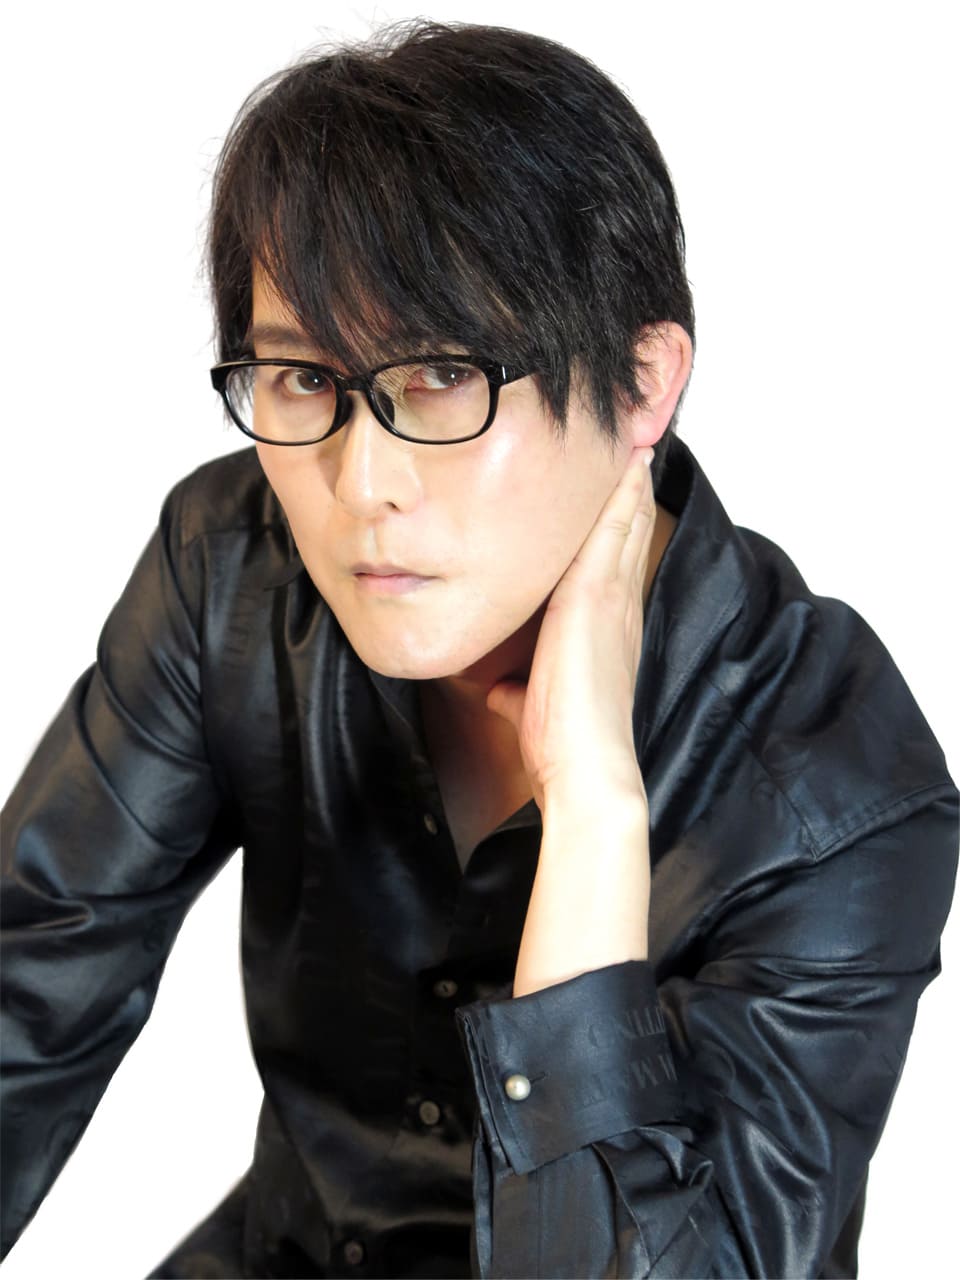 Evangelion Screenshots on X: Today is also the birthday of Takehito  Koyasu, Aoba's Japanese voice actor. He's also known for portraying Dio  Brando in Jojo's Bizarre Adventure, Snufkin in Moomin, and Bobobo-bo